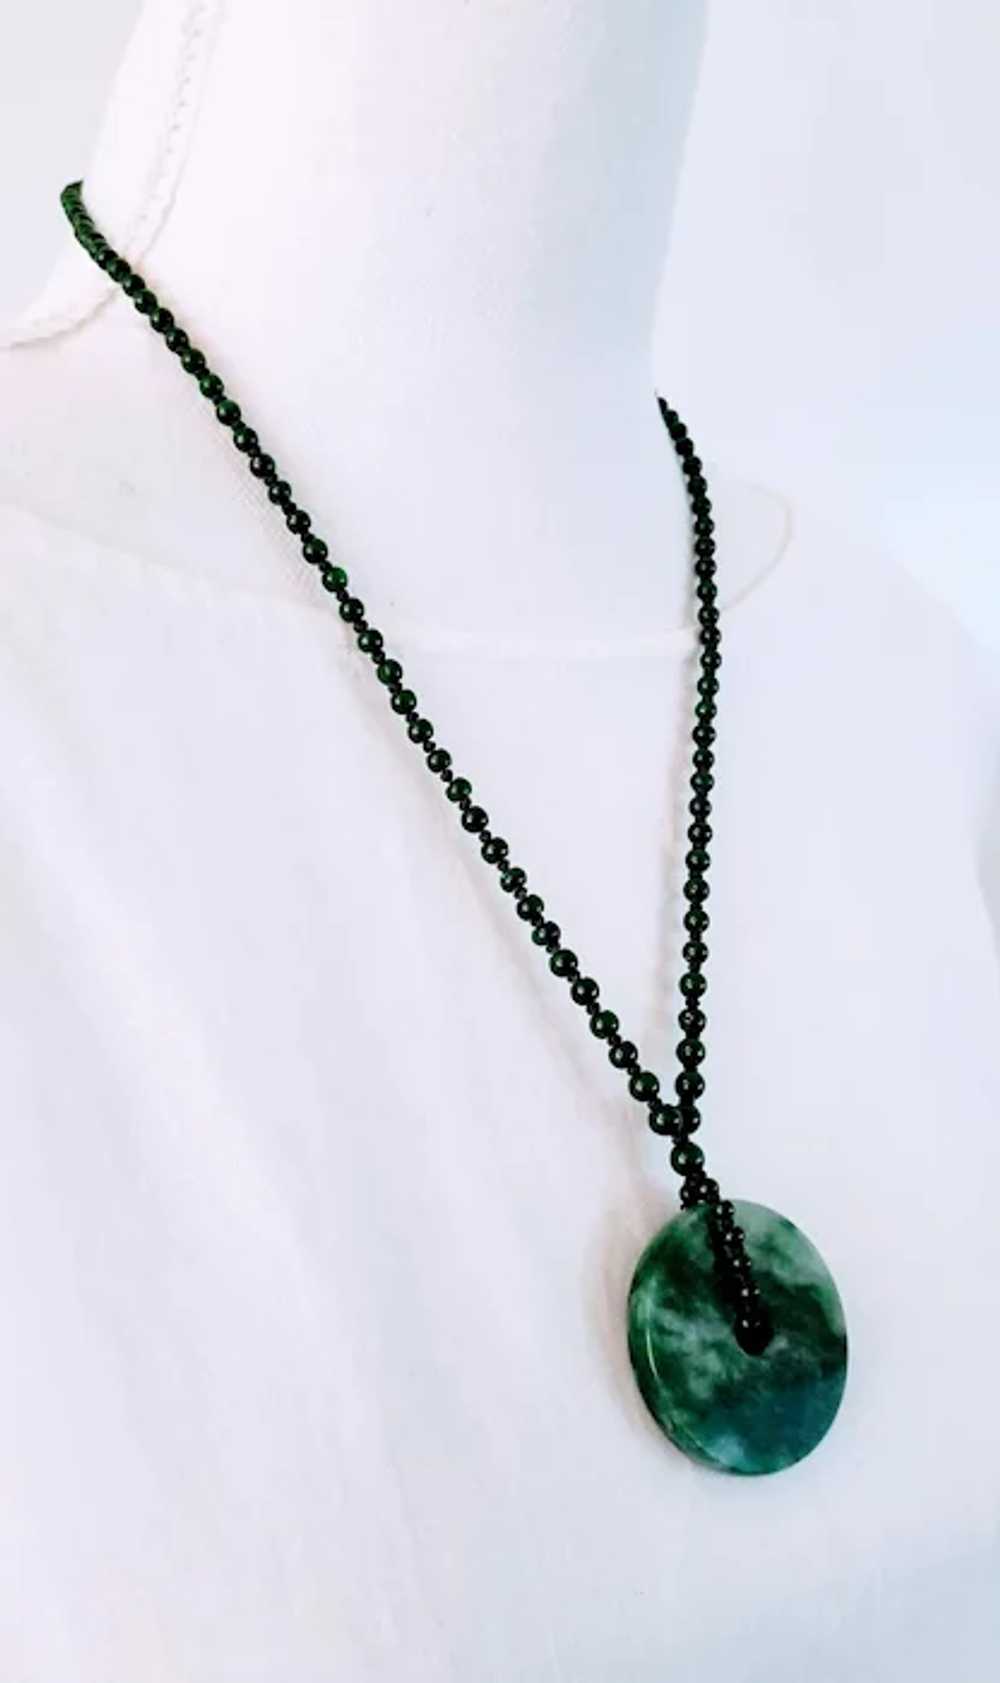 14K Jadeite Pendant and Beads Necklace - image 5